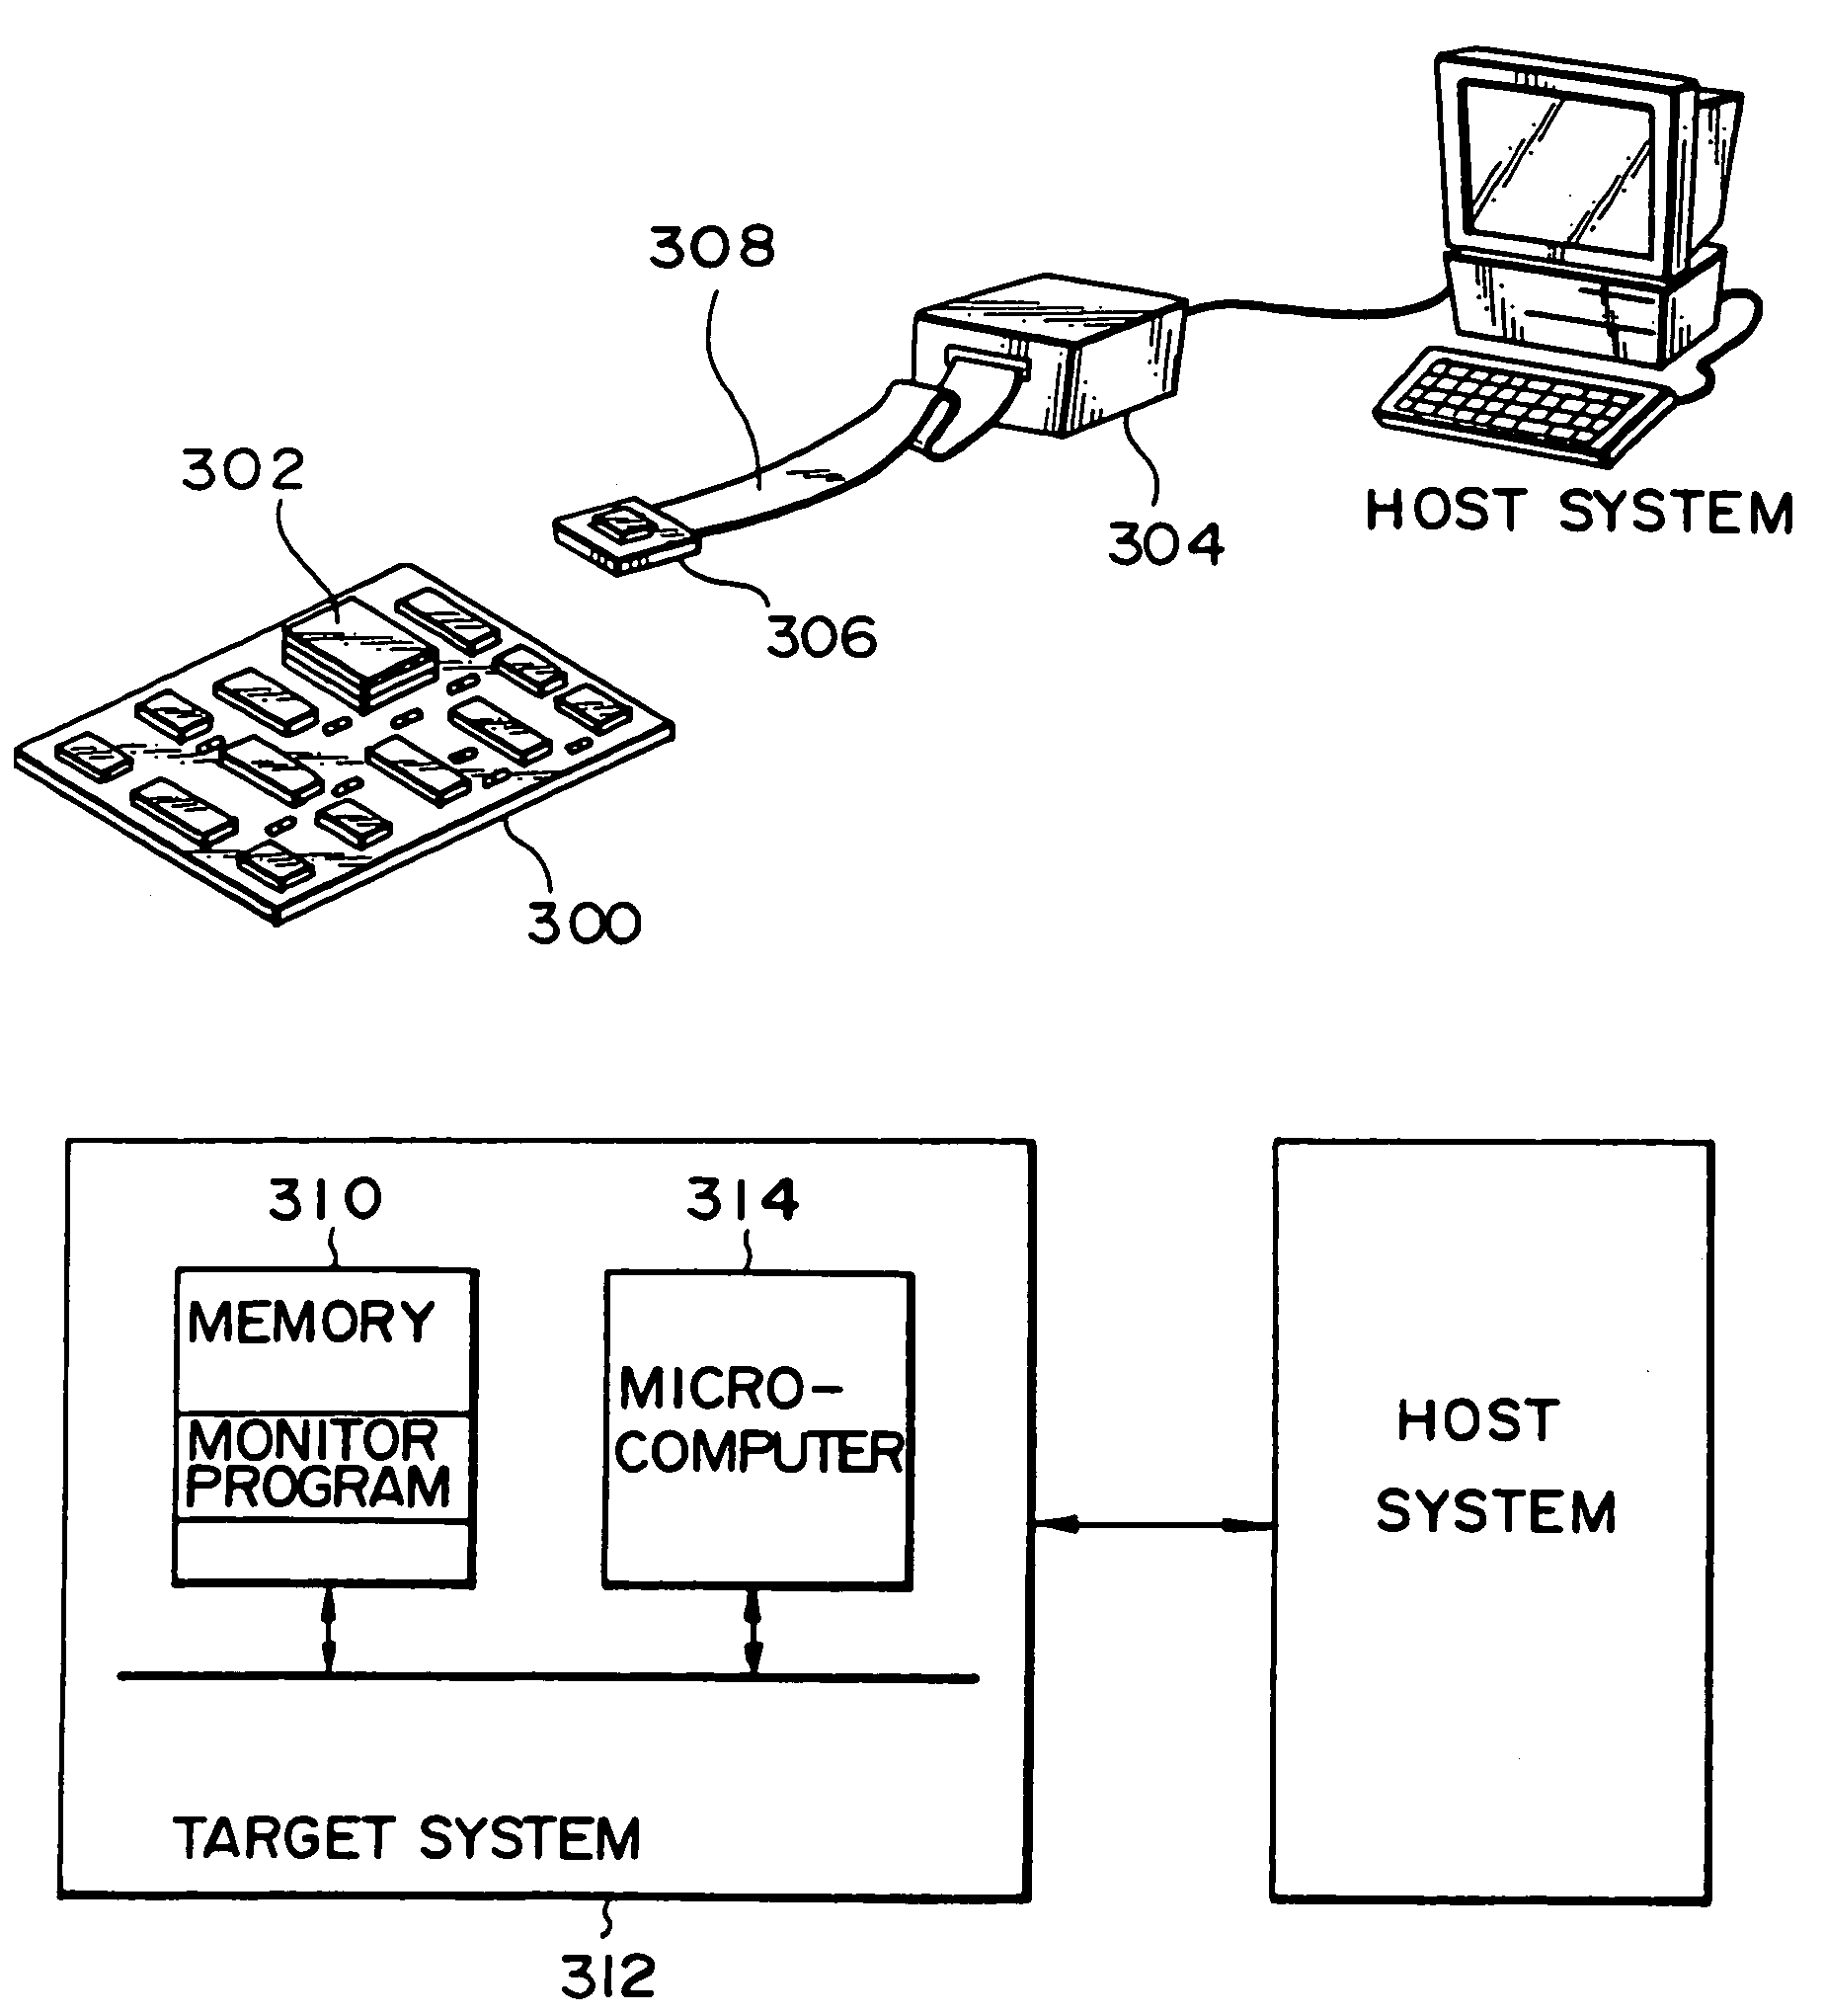 Microcomputer, electronic equipment and debugging system